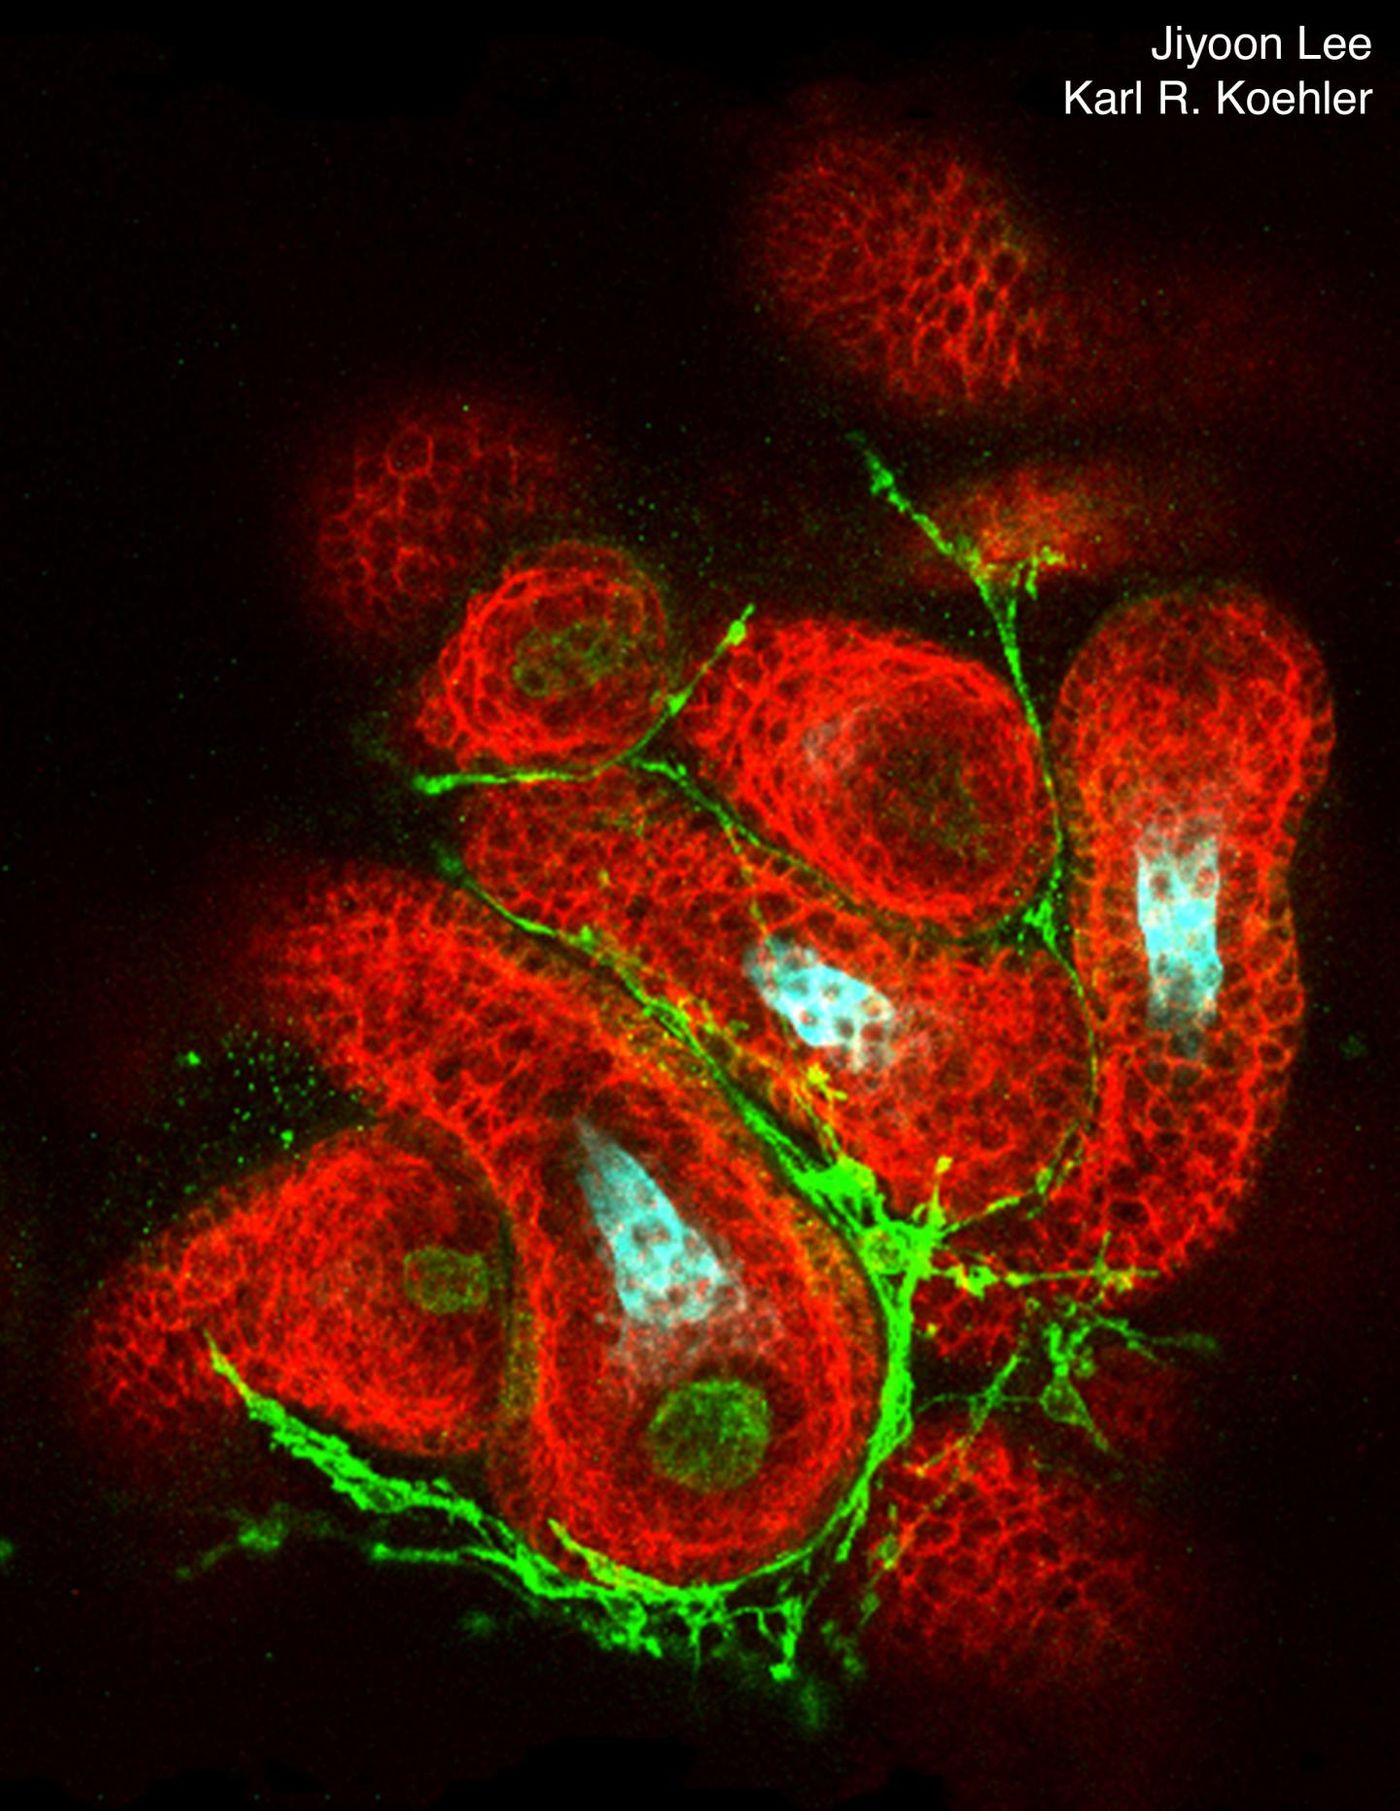 Lee et al. show that hair follicles can be generated from mouse pluripotent stem cells in a 3-D cell culture system. The hair follicles (red) grow radially out of spherical skin organoids and contain follicle-initiating dermal papilla cells (green cells) and hair shafts (cyan). / Credit: Artwork by Jiyoon Lee and Karl Koehler.